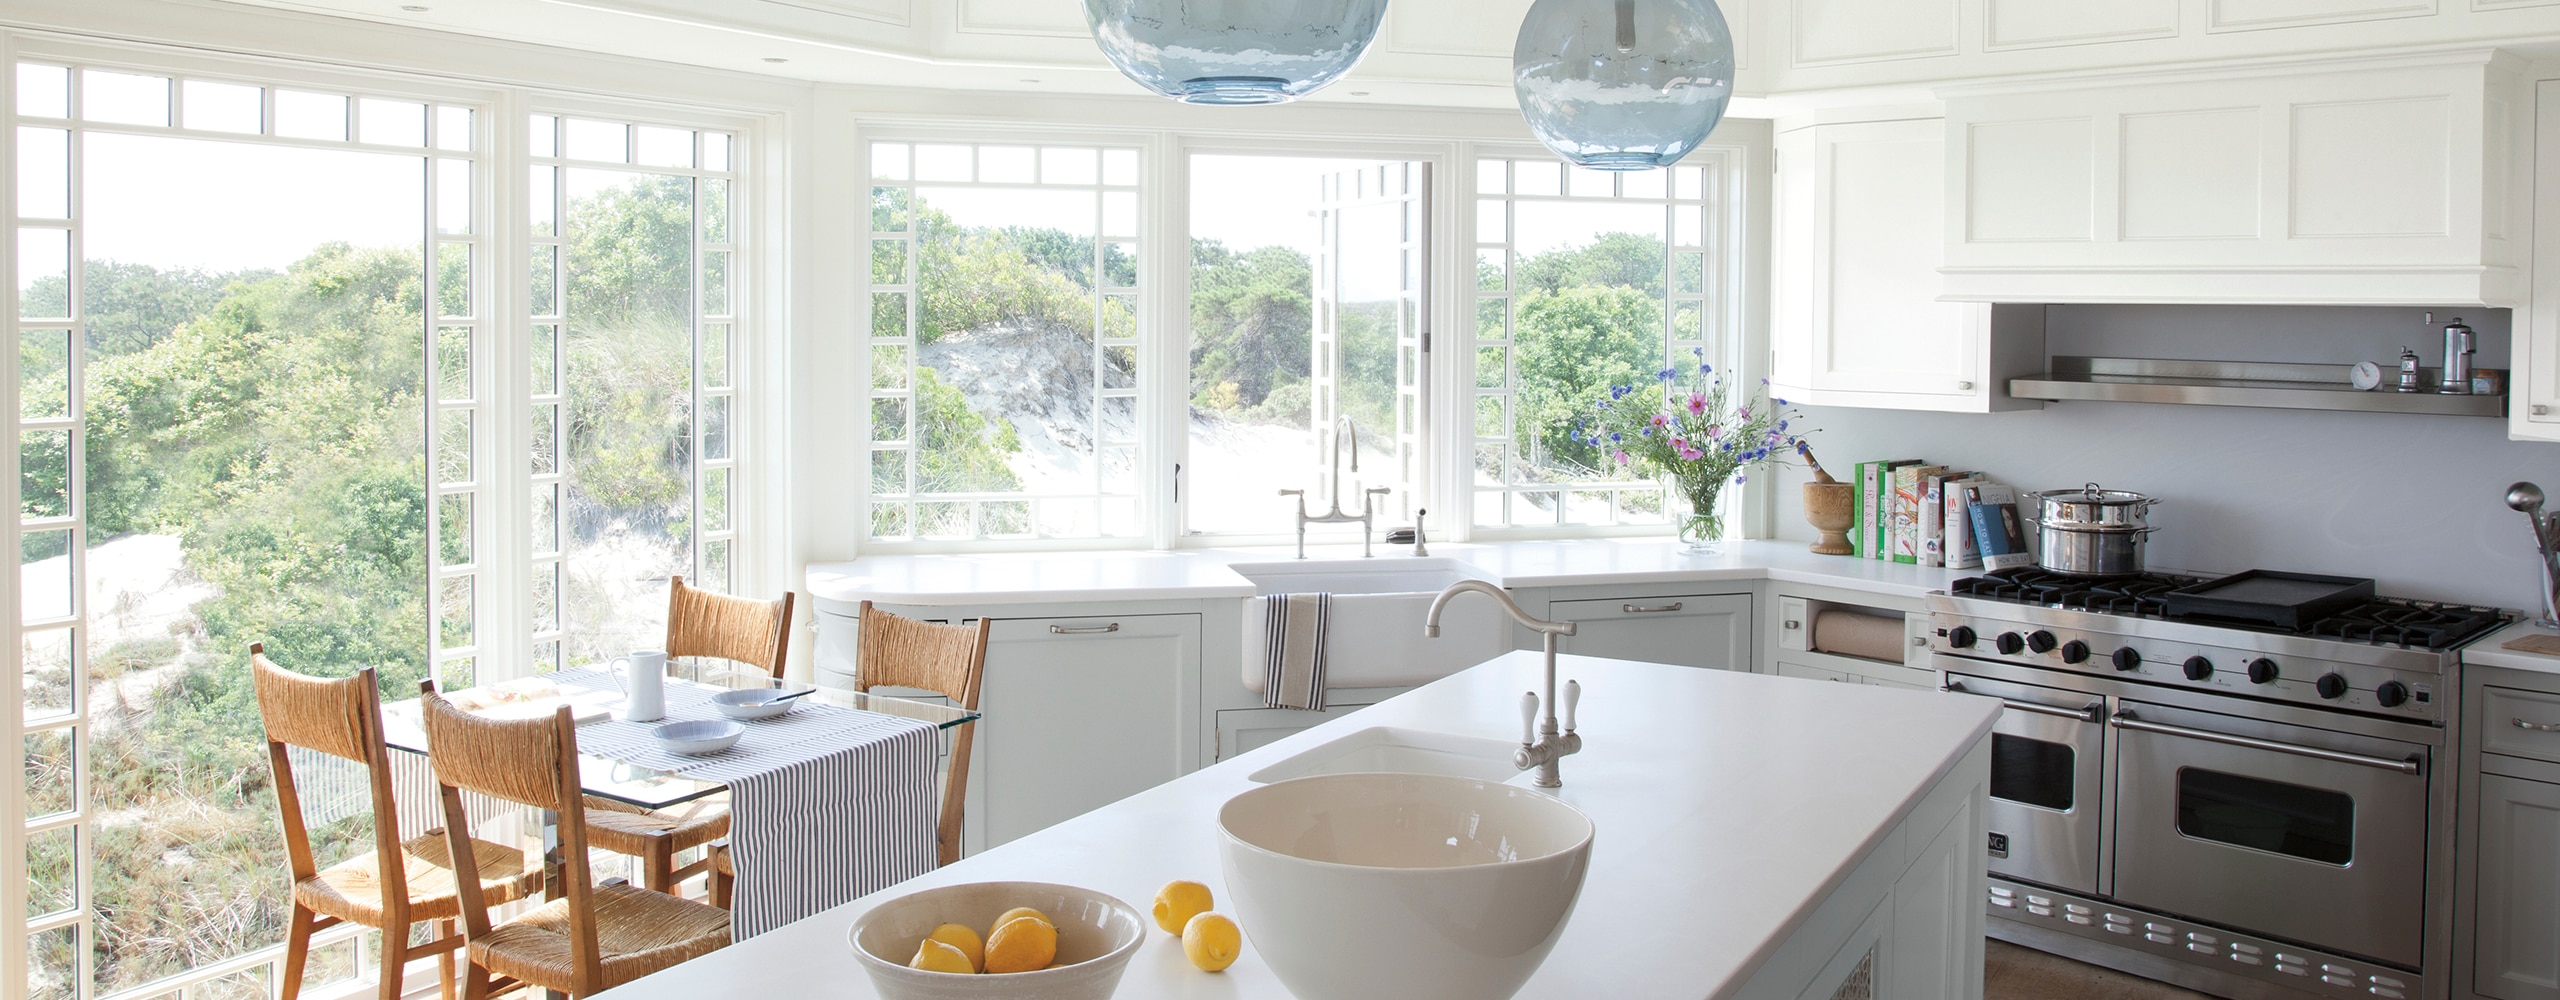 Bright, airy kitchen with center island and cliffside view, off-white painted walls, and a light blue-painted ceiling.